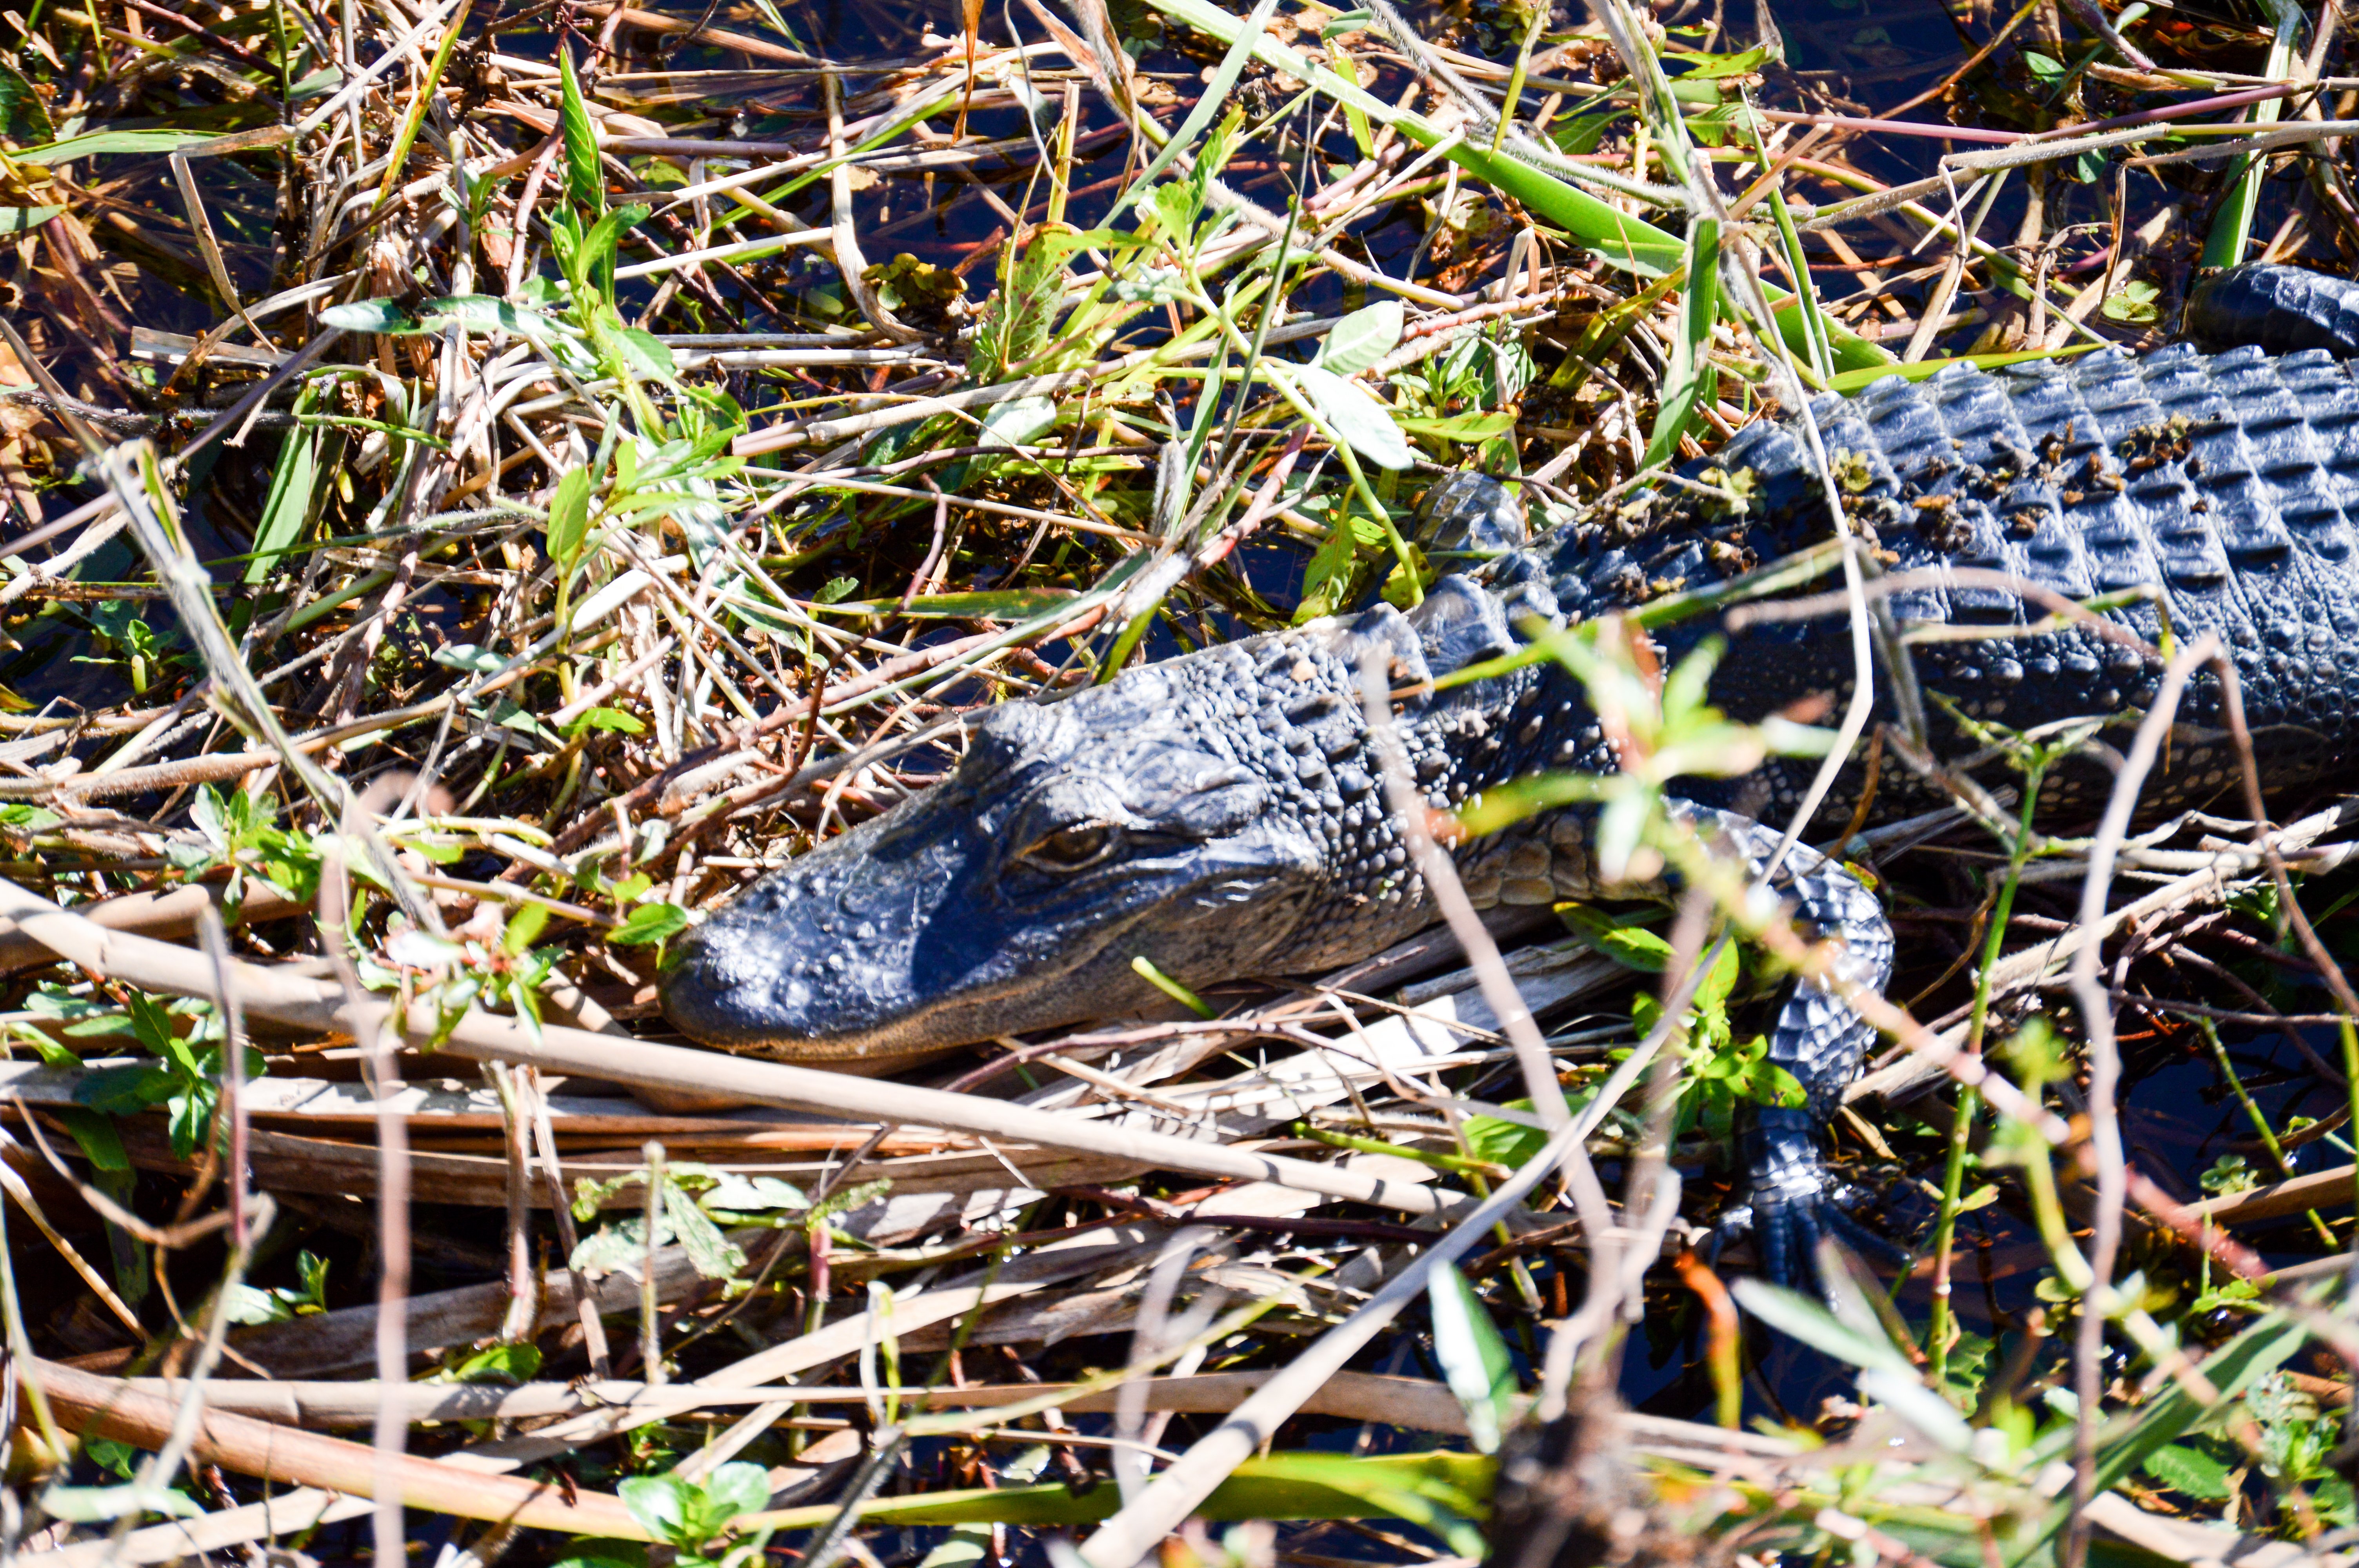 Young, adolescent gator sun bathing in the Everglades